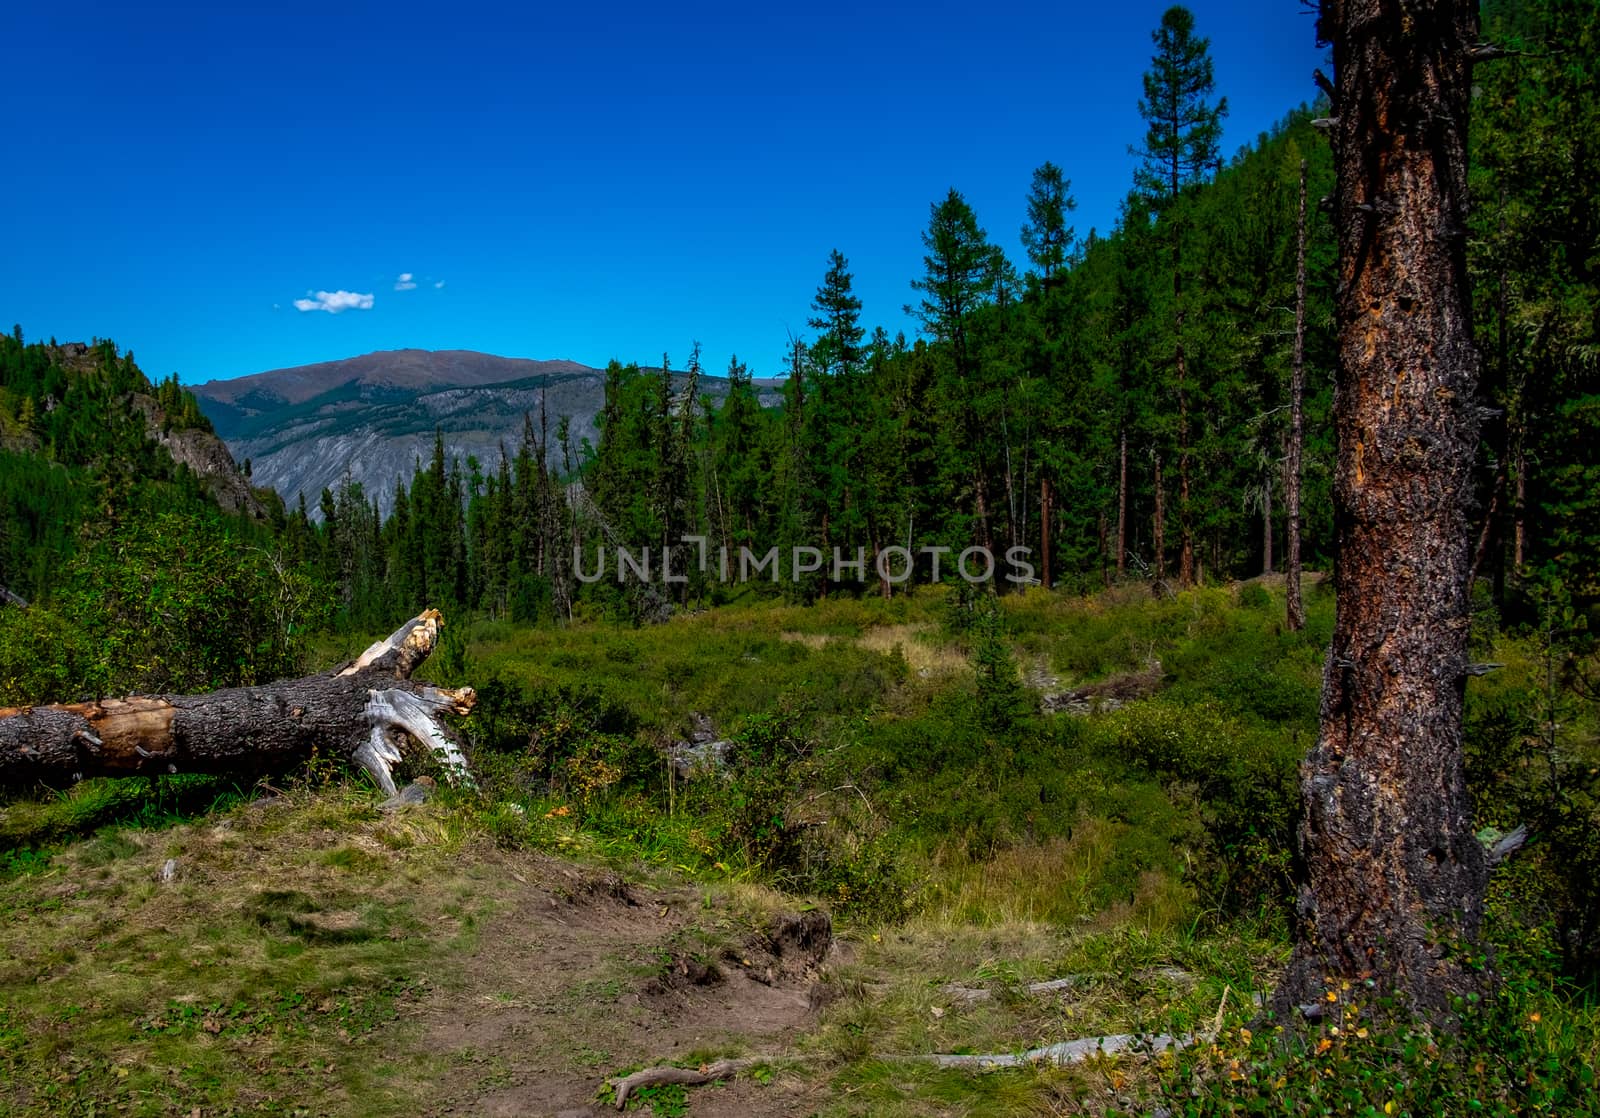 A fallen tree in a mountain forest in the Altai Republic.